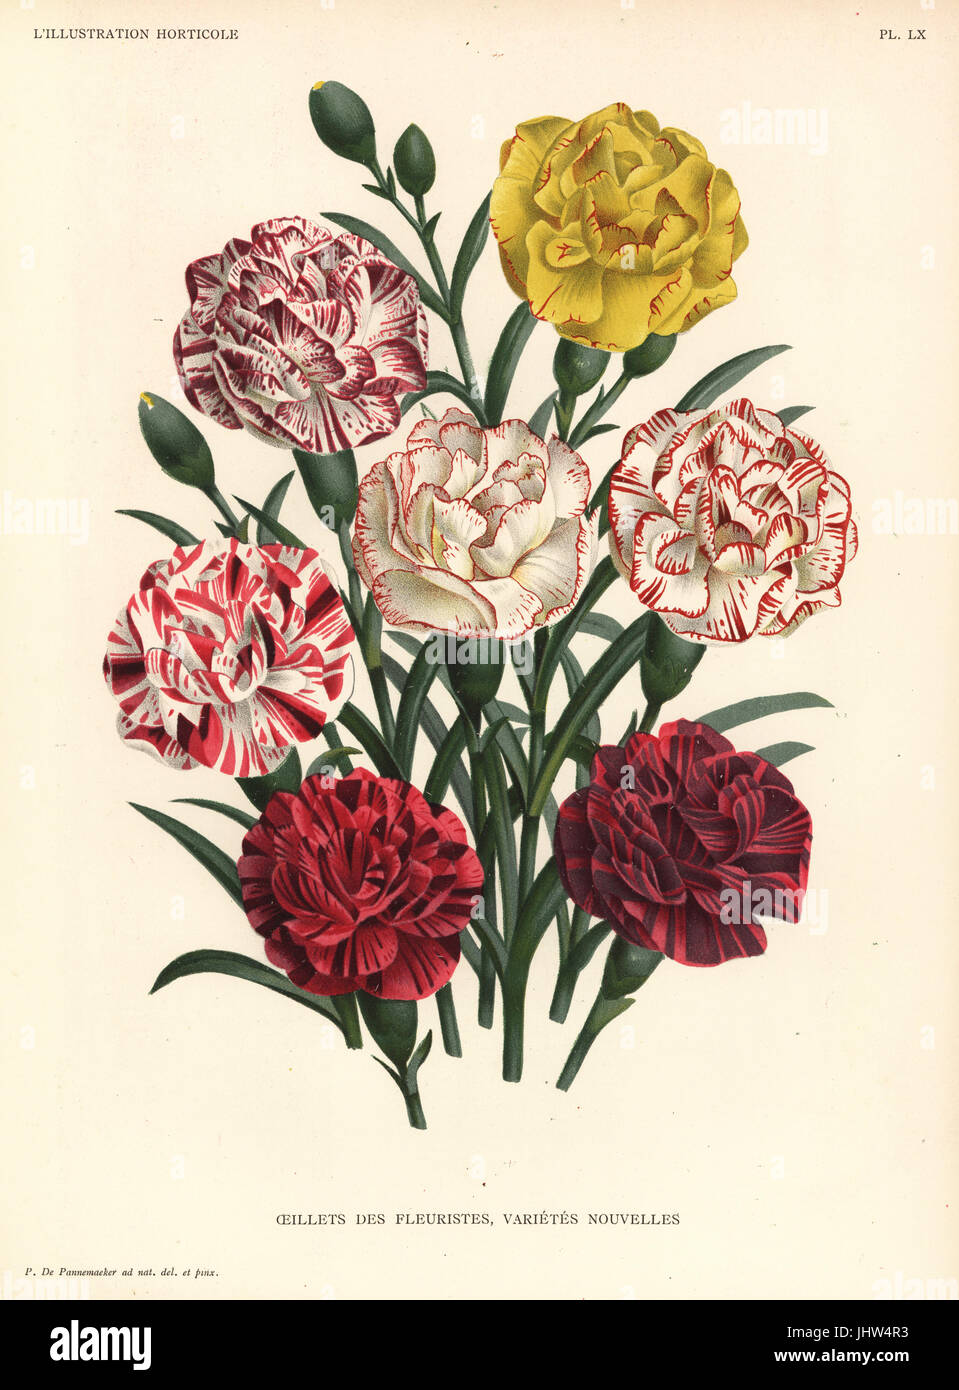 Carnation varieties, Dianthus caryophyllus. Drawn and chromolithographed by Pieter de Pannemaeker from Jean Linden's l'Illustration Horticole, Brussels, 1888. Stock Photo